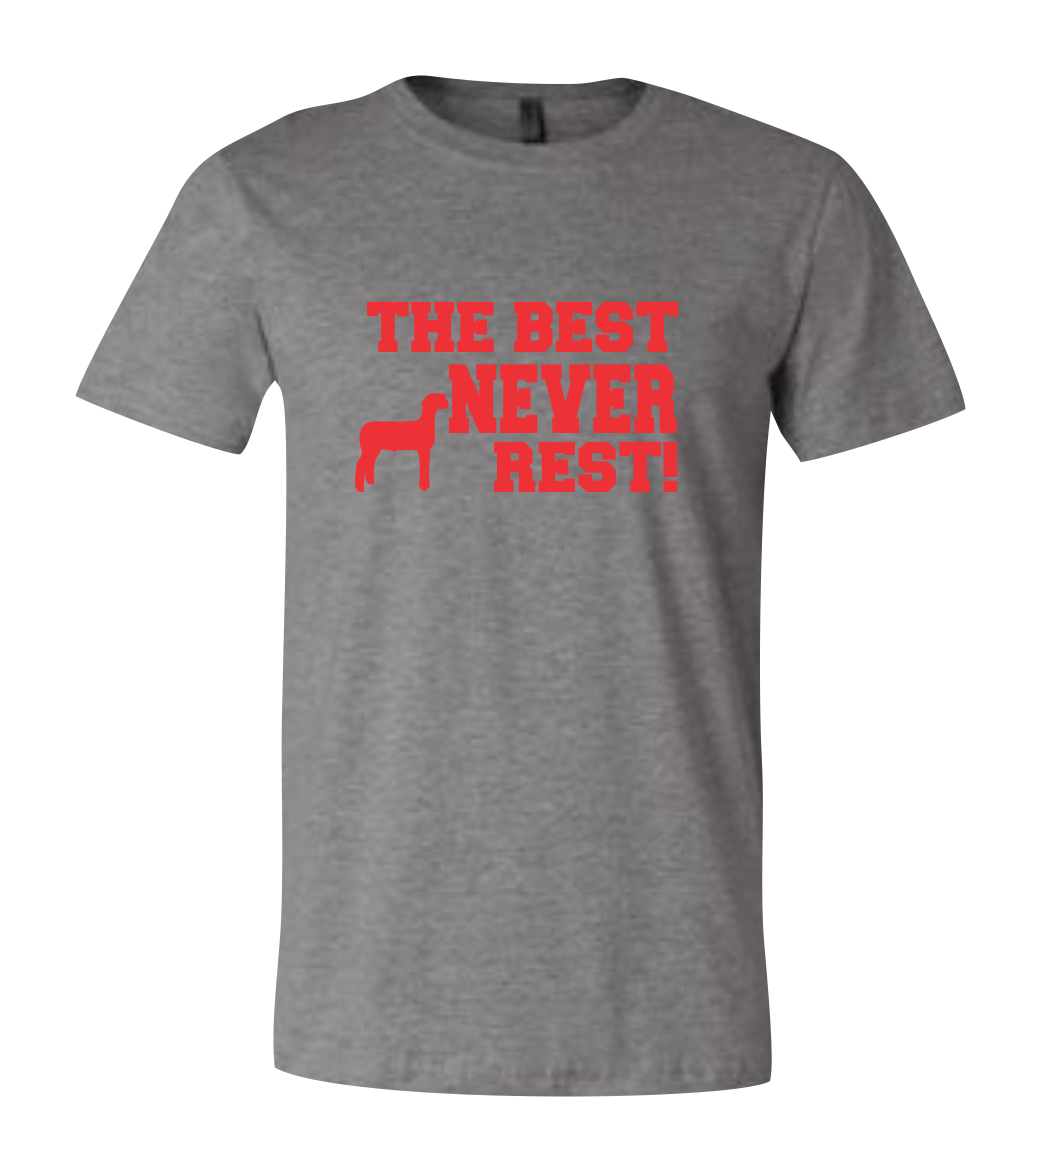 The Best Never Rest Short-Sleeve Graphic T-shirt